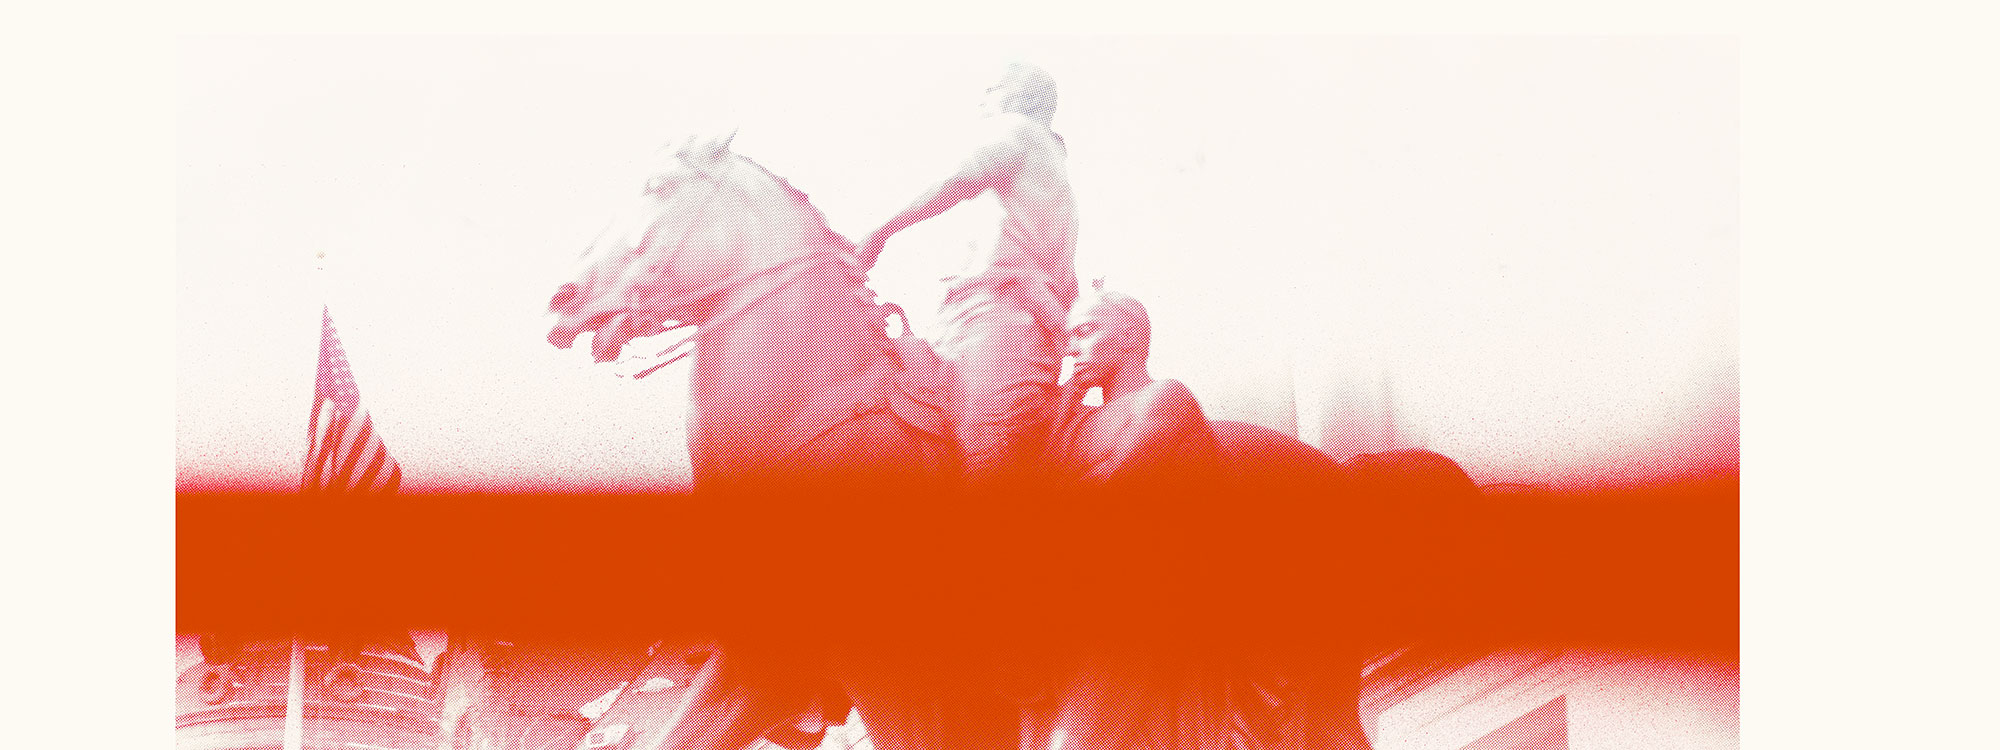 A photo of a sculture of a man on a horse with another man walking beside him. The photo has a large blurred red line across it.